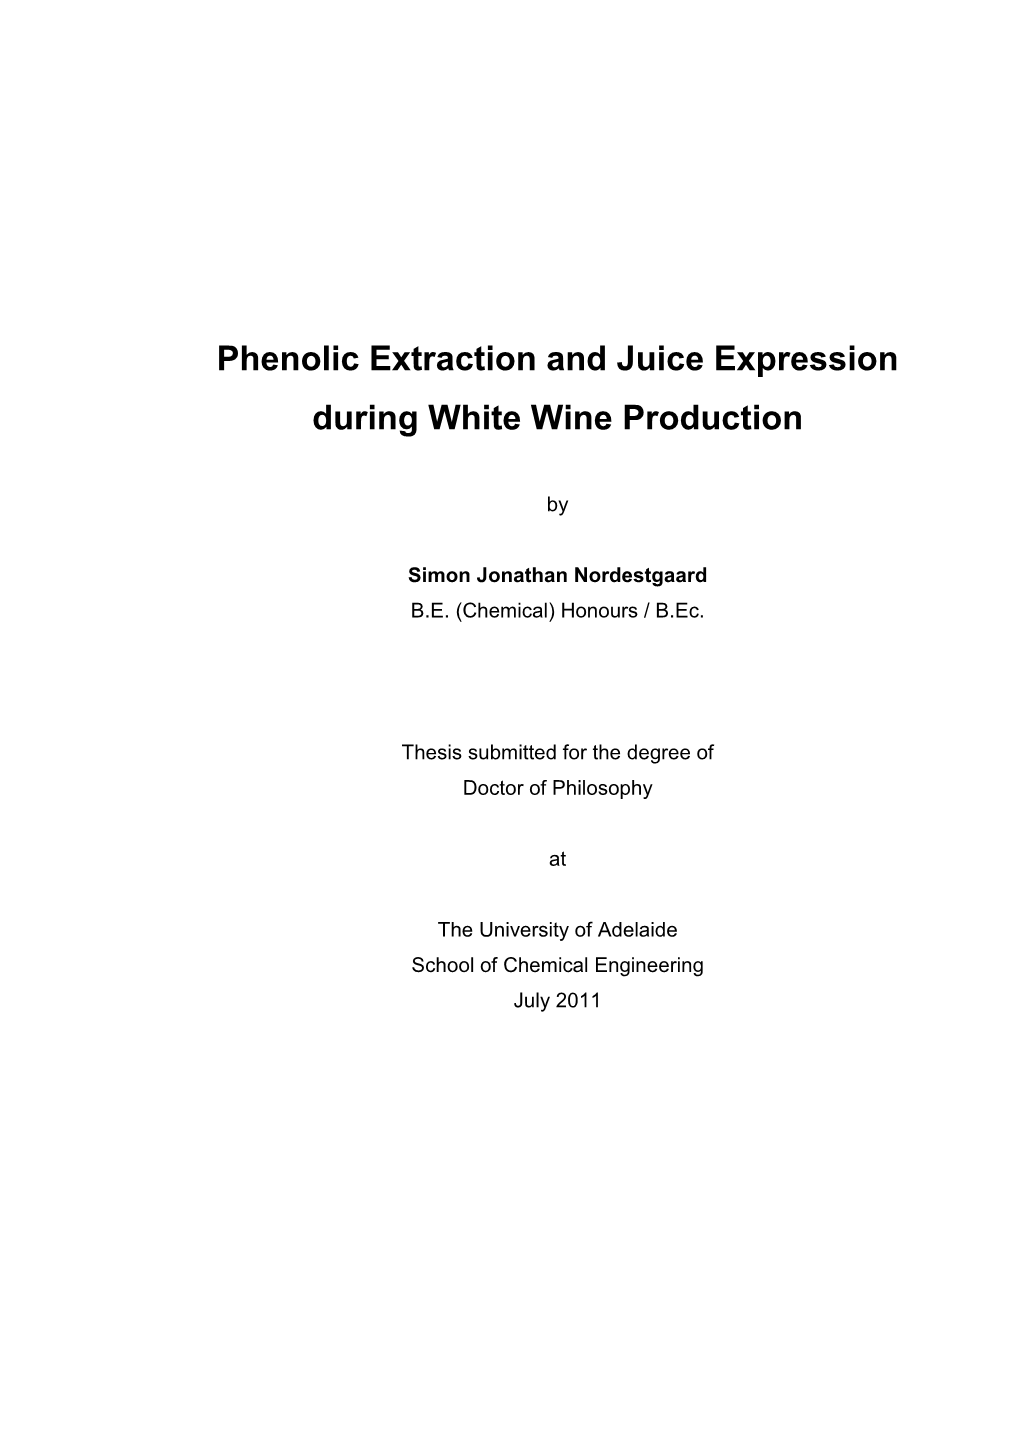 Phenolic Extraction and Juice Expression During White Wine Production